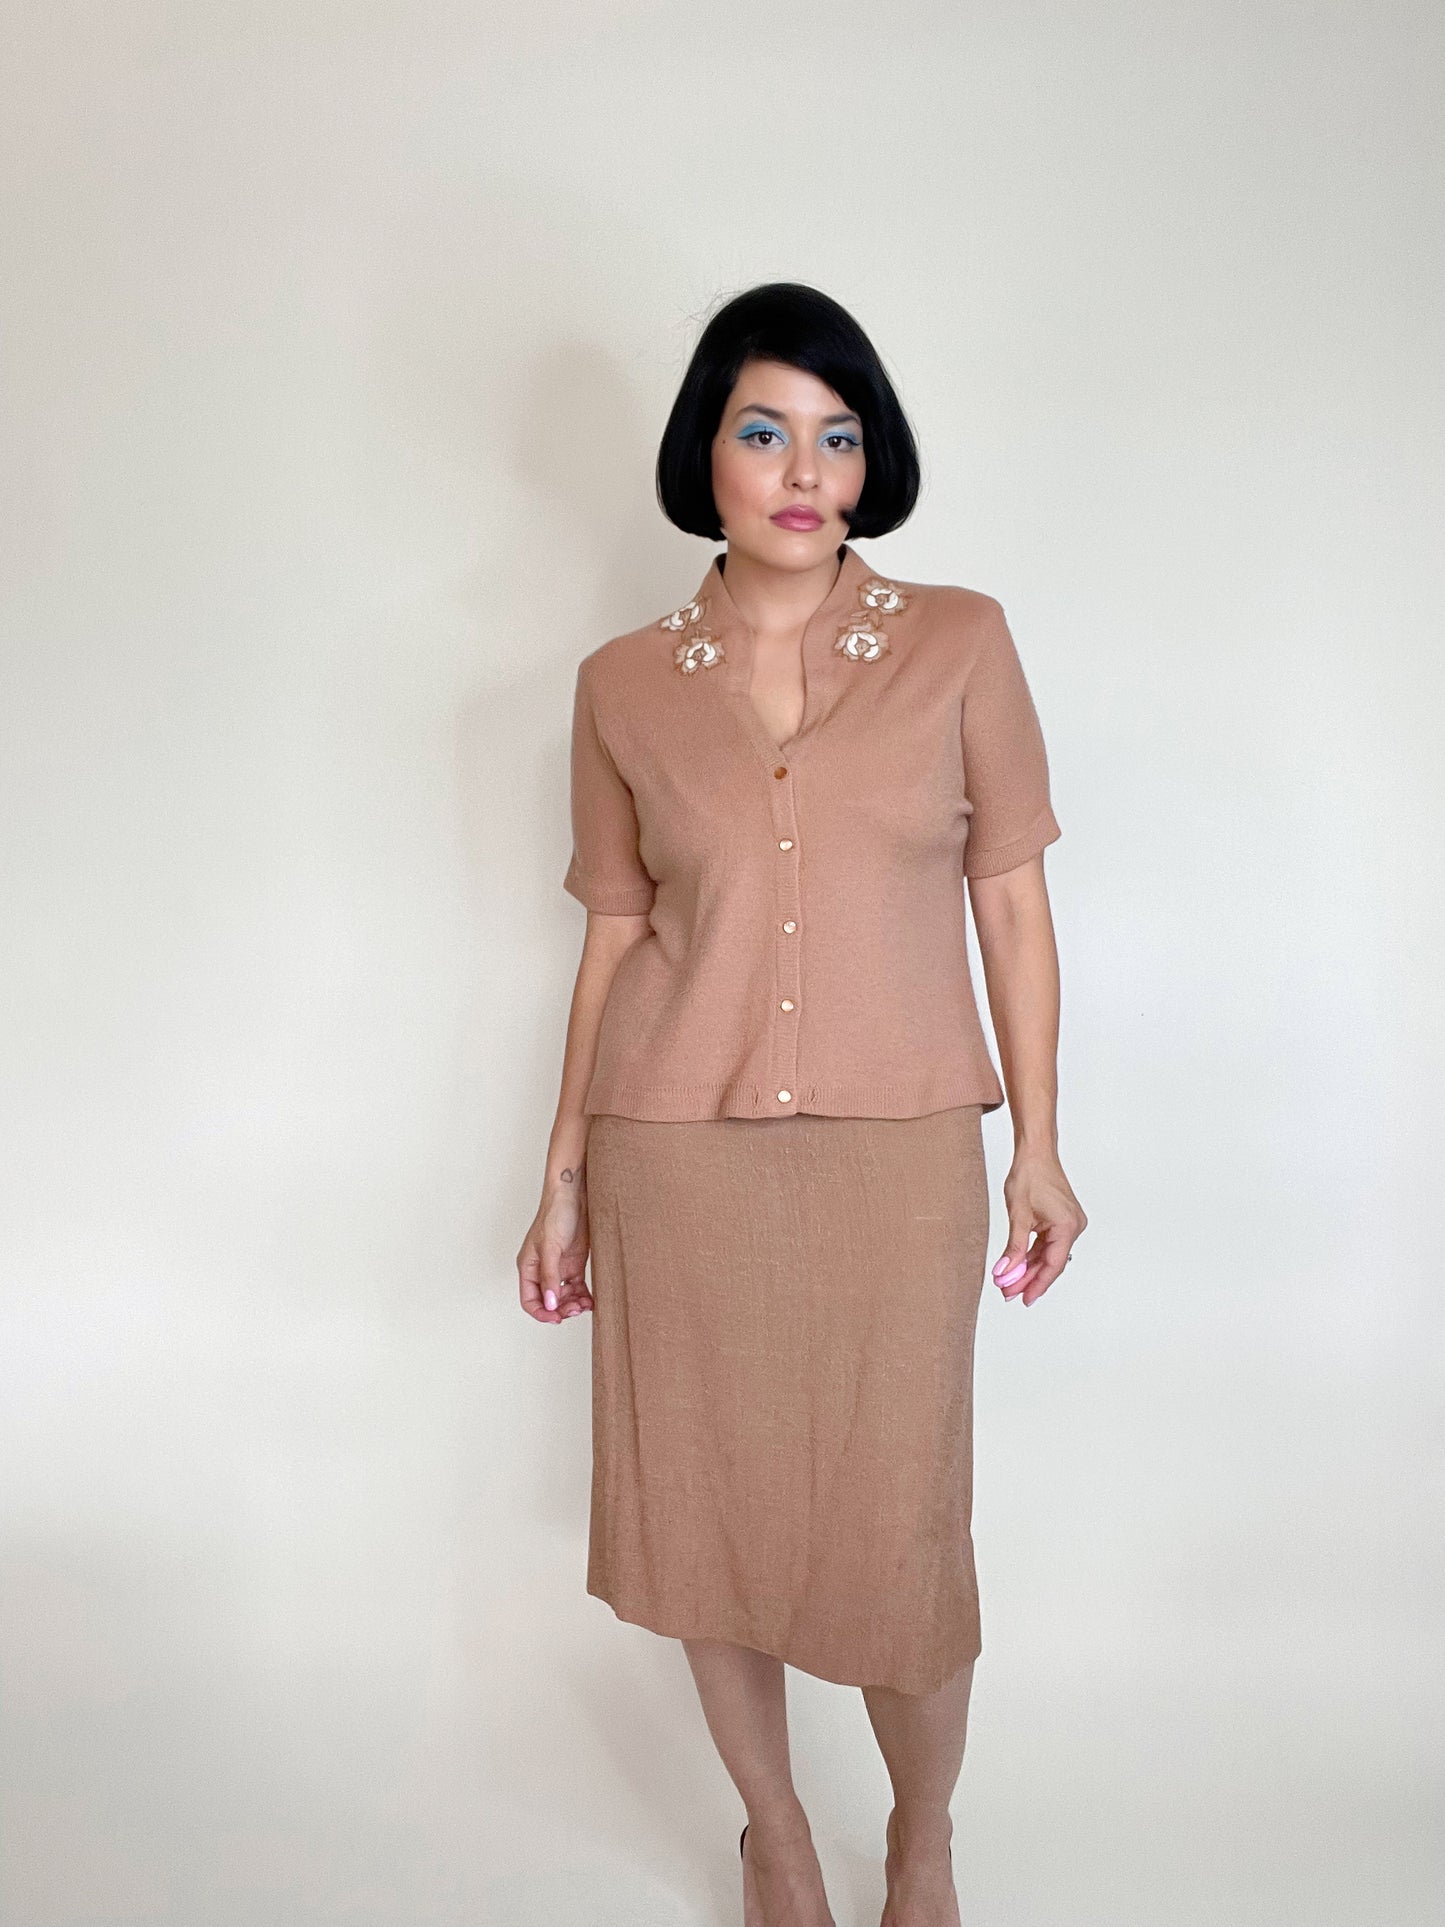 Vintage 50s 60s "Alex Colman California" Brown Cashmere Knit Cardigan with Matching Cotton Linen Wiggle Style Dress Fits Sizes XXS-S